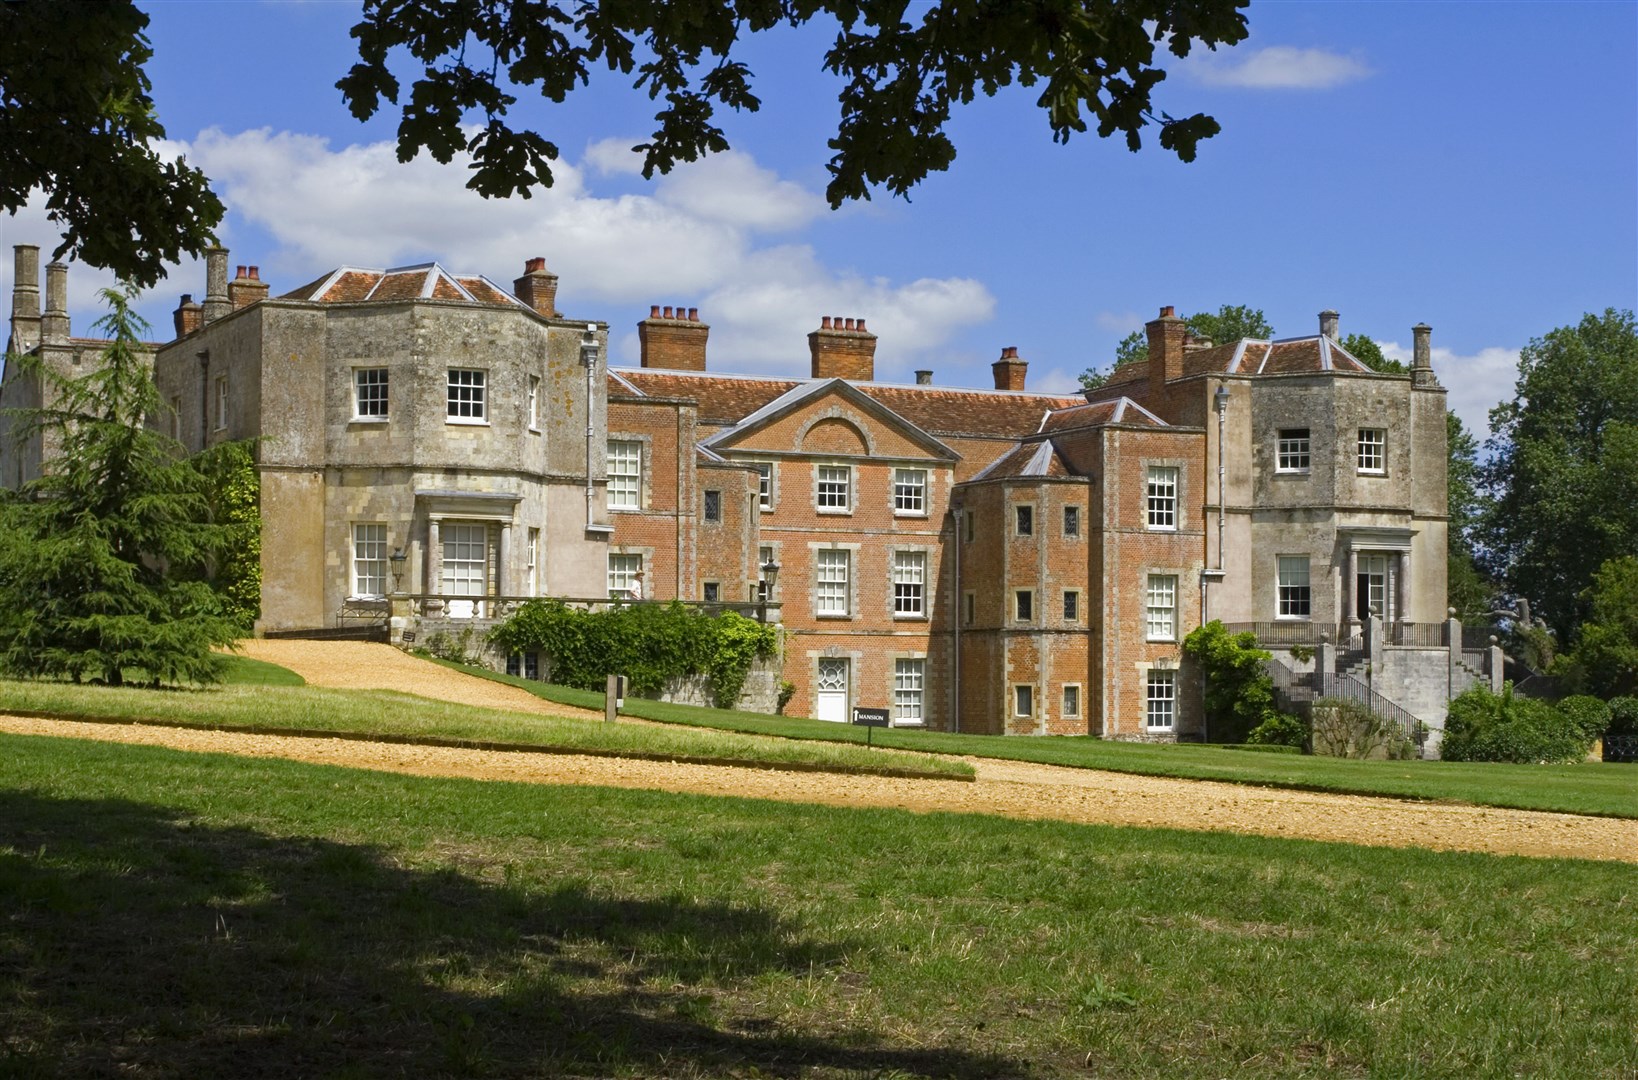 The south front is predominantly 18th-century (National Trust/PA Wire)